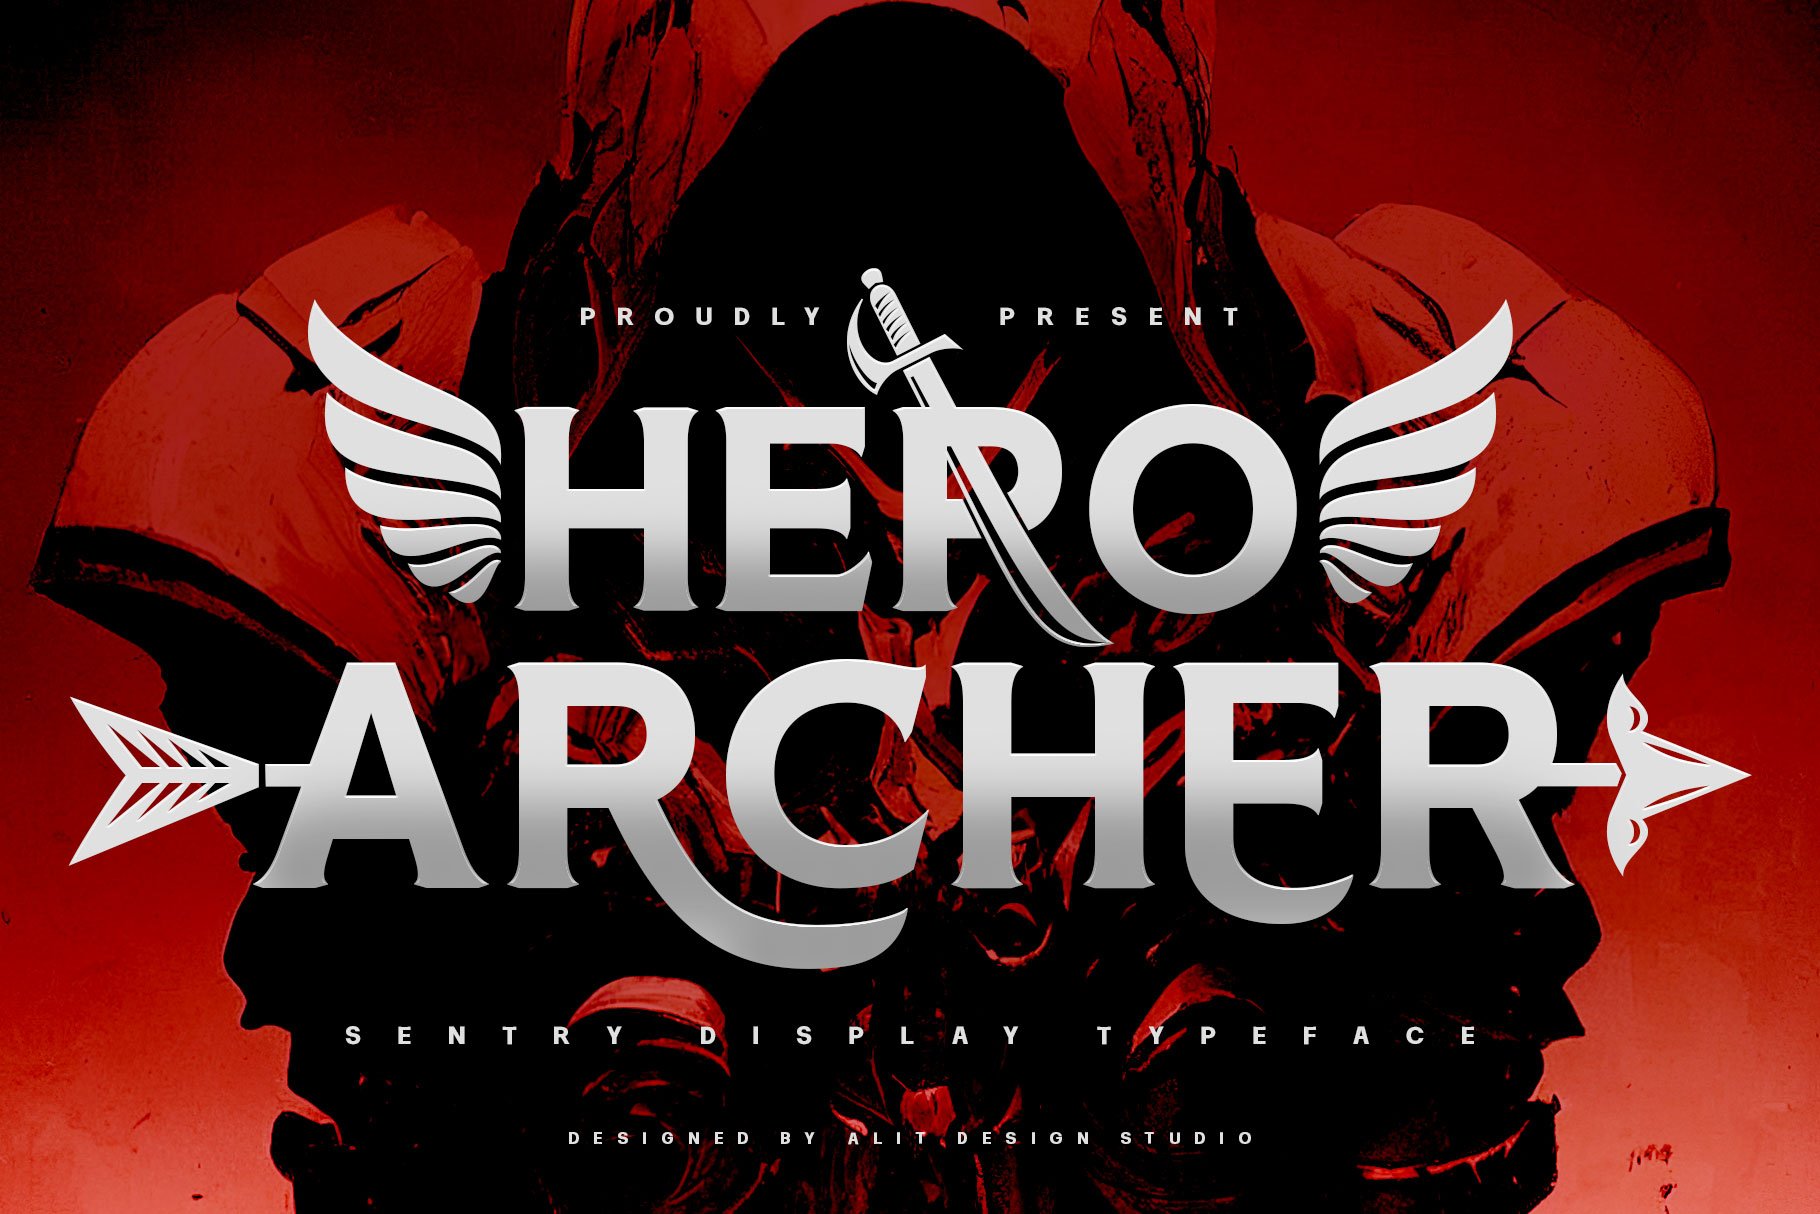 The Hero Archer Typeface cover image.